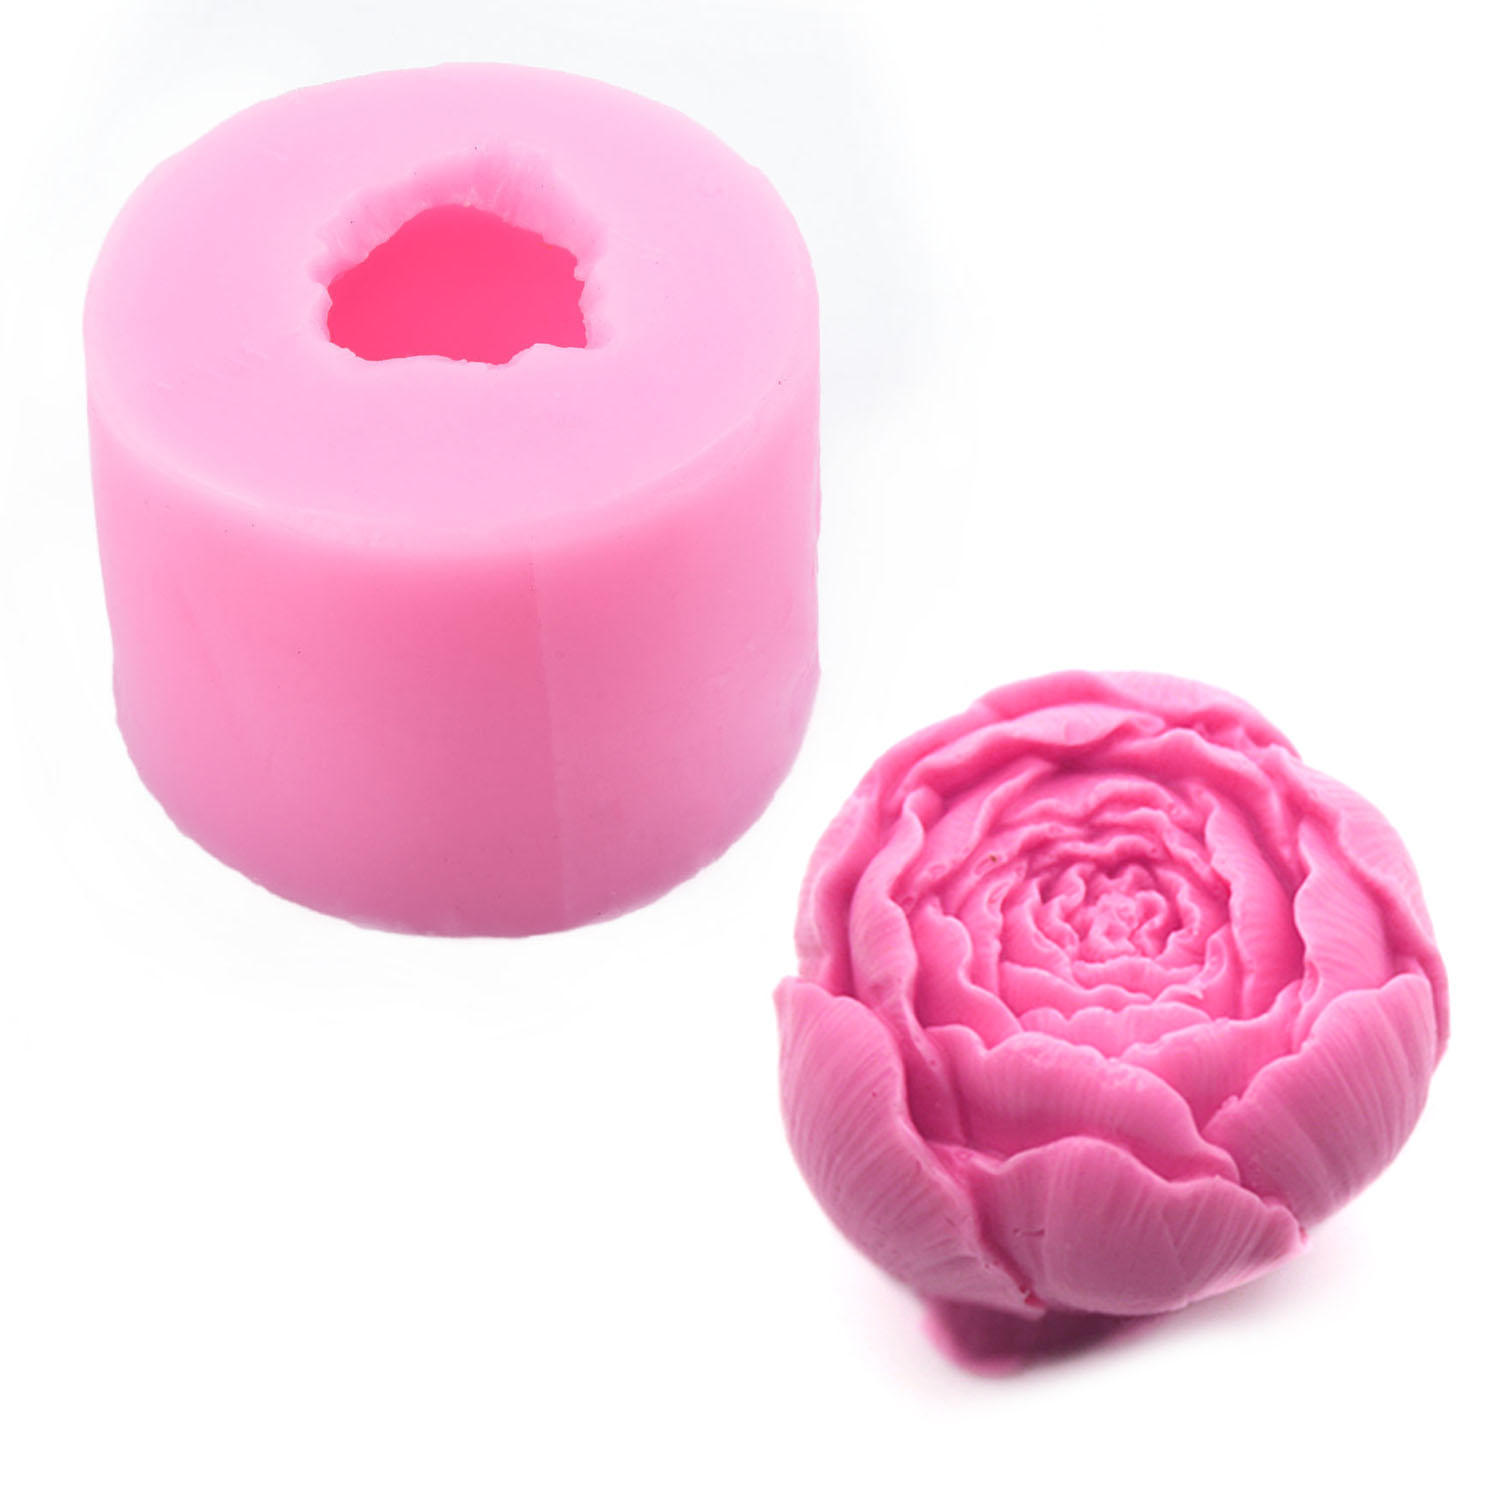 3D Round Rose Flower Shape Silicone Soap Mold DIY Handmade Soap Molds Craft Tool 